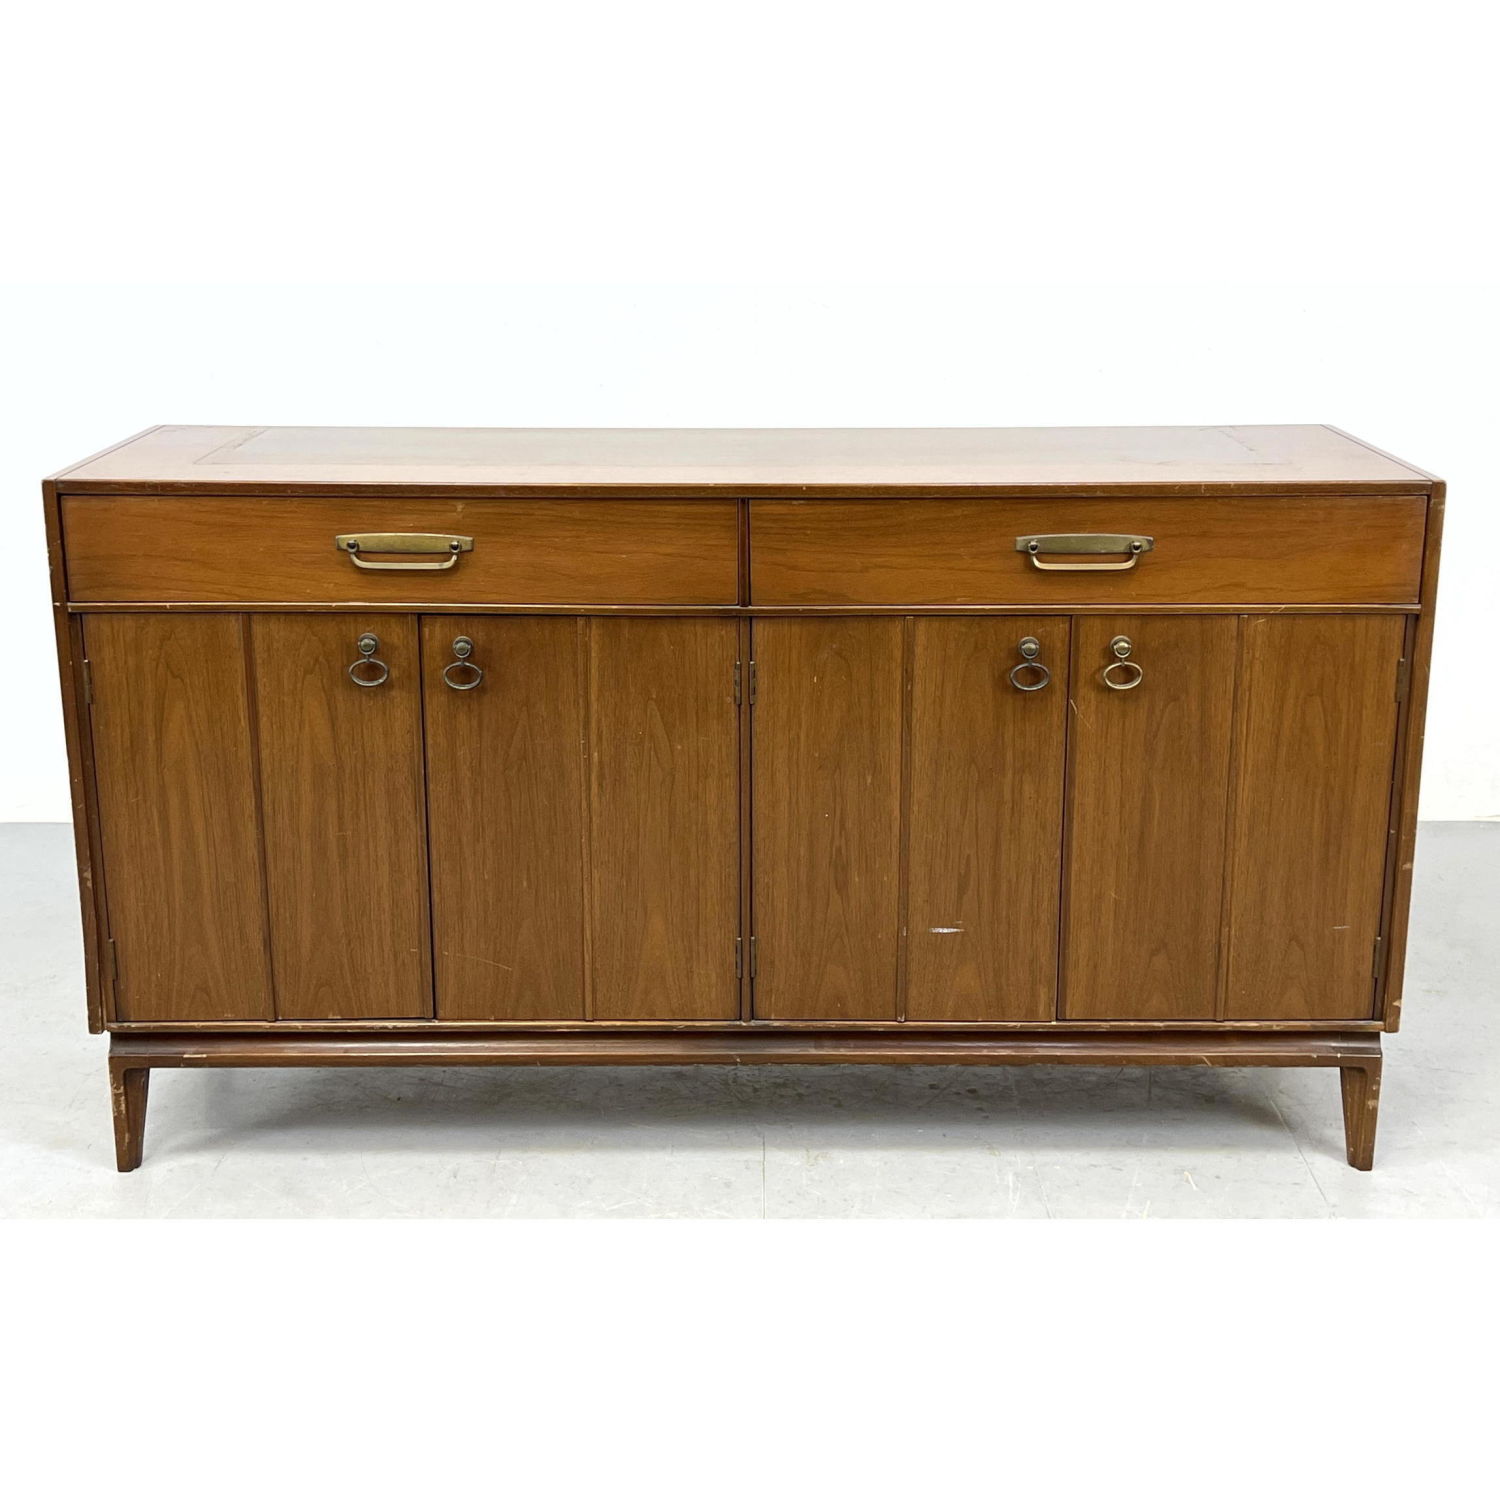 RED LION American Modern Credenza 2fe6d9